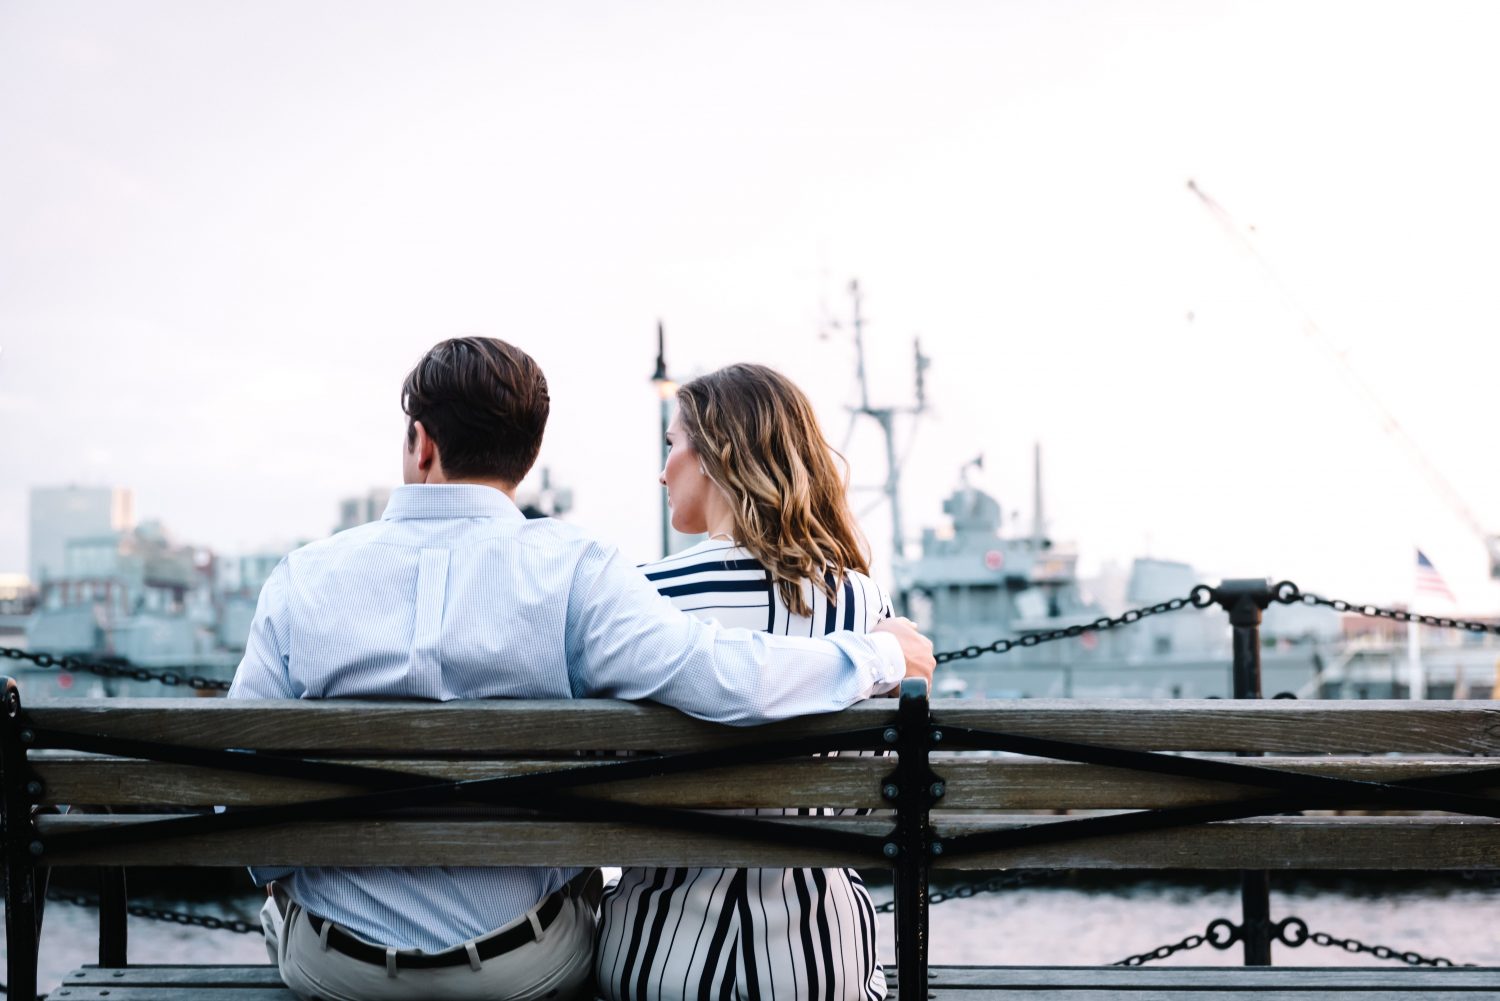 A man and a woman sitting on a bench looking out into the distance.